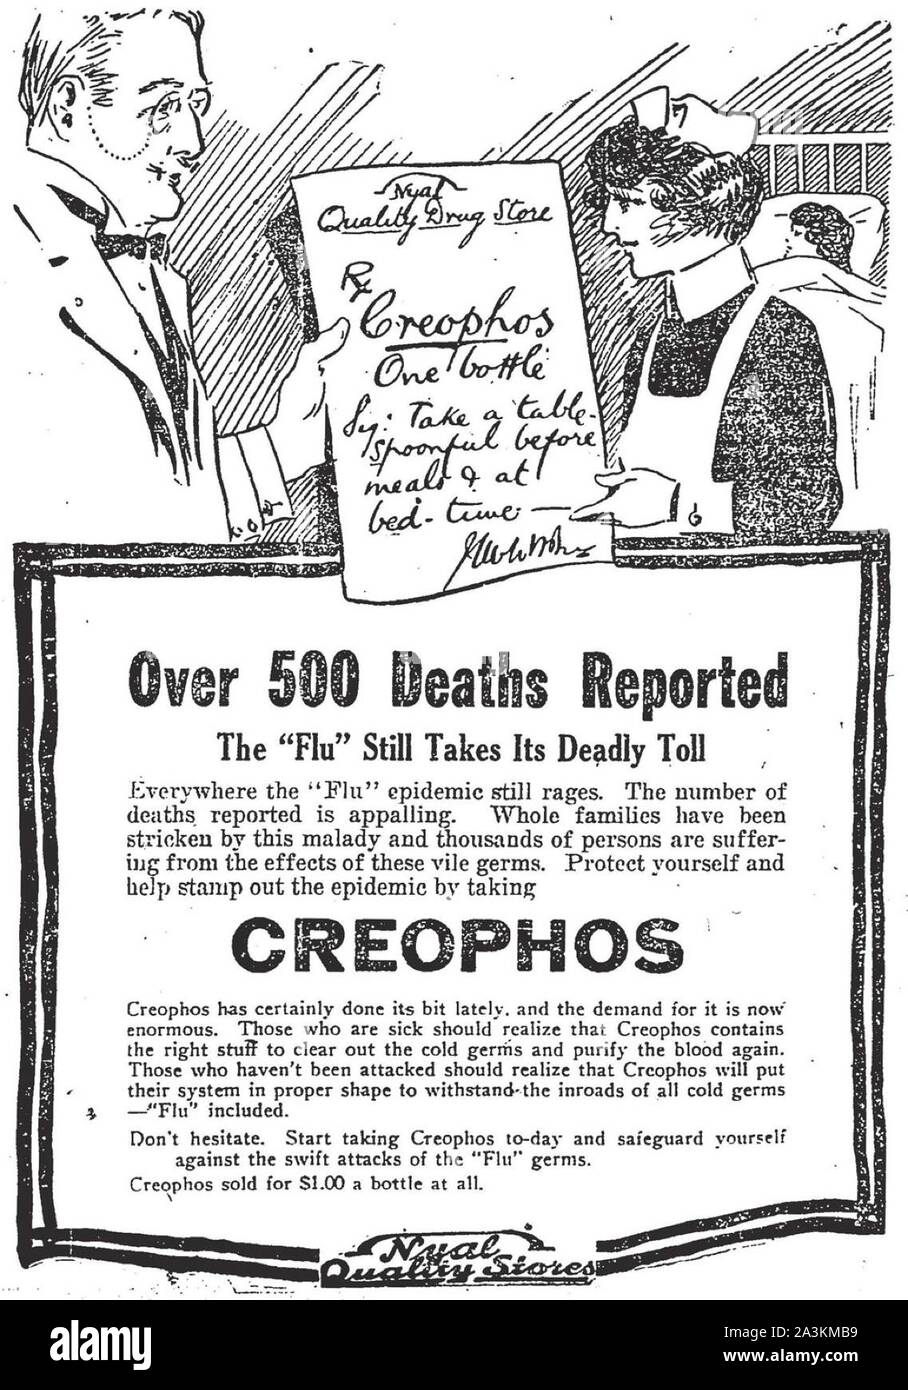 1918-1919. An epidemic of 'Spanish Flu' spread around the world. At least 20 million died, although some estimates put the final toll at 50 million. It's estimated that between 20 per cent and 40 per cent of the entire world's population became sick Stock Photo